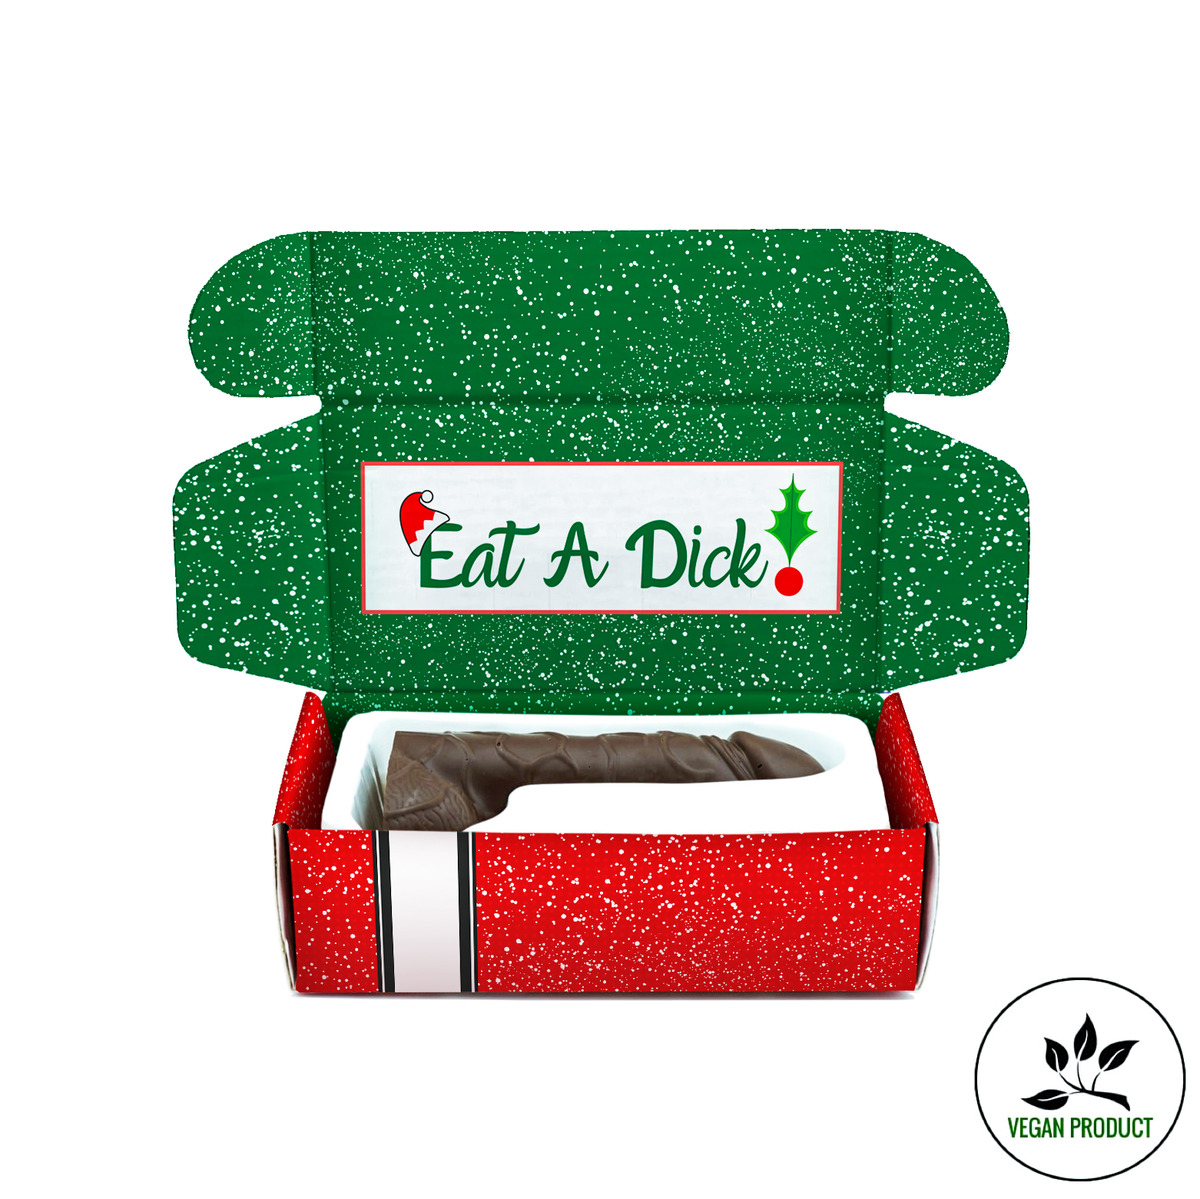 Eat a Dick - The Christmas Dick